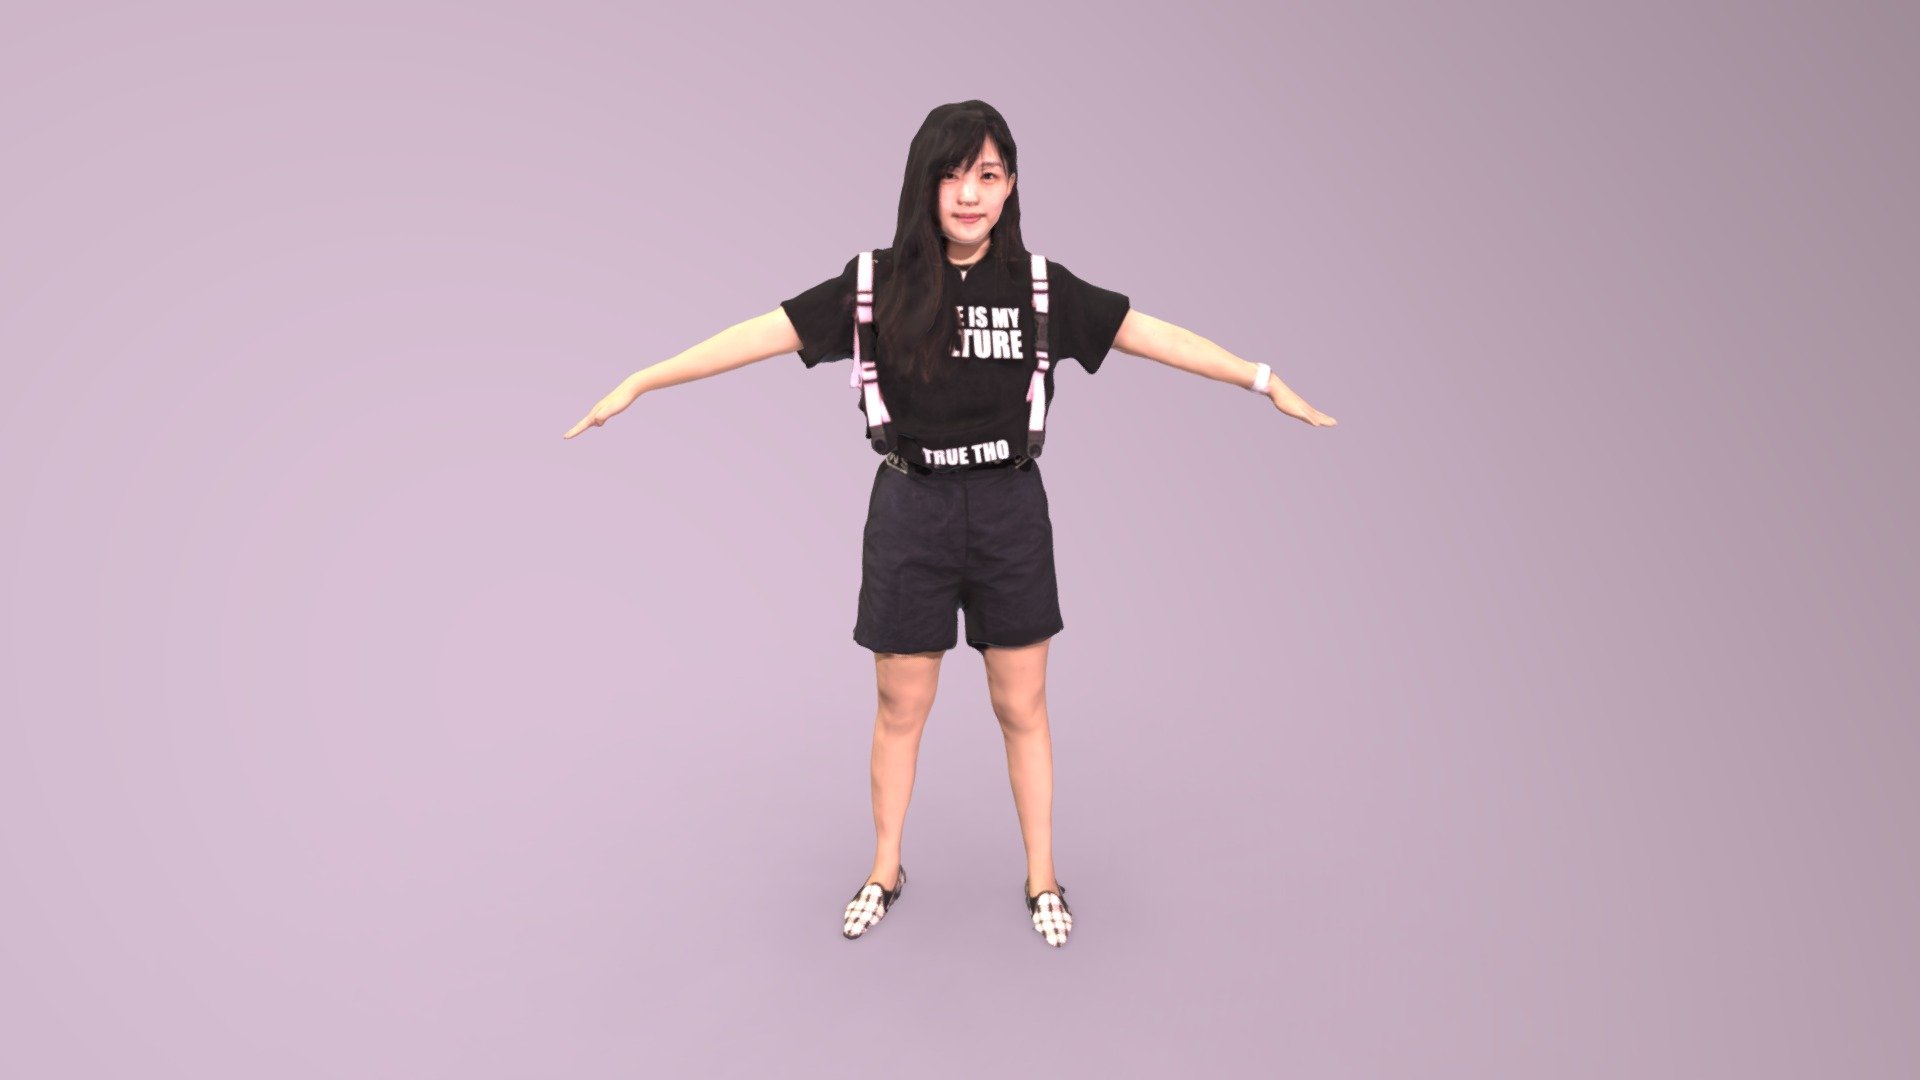 95 -T Pose - 3D model by stupidboy34 3d model